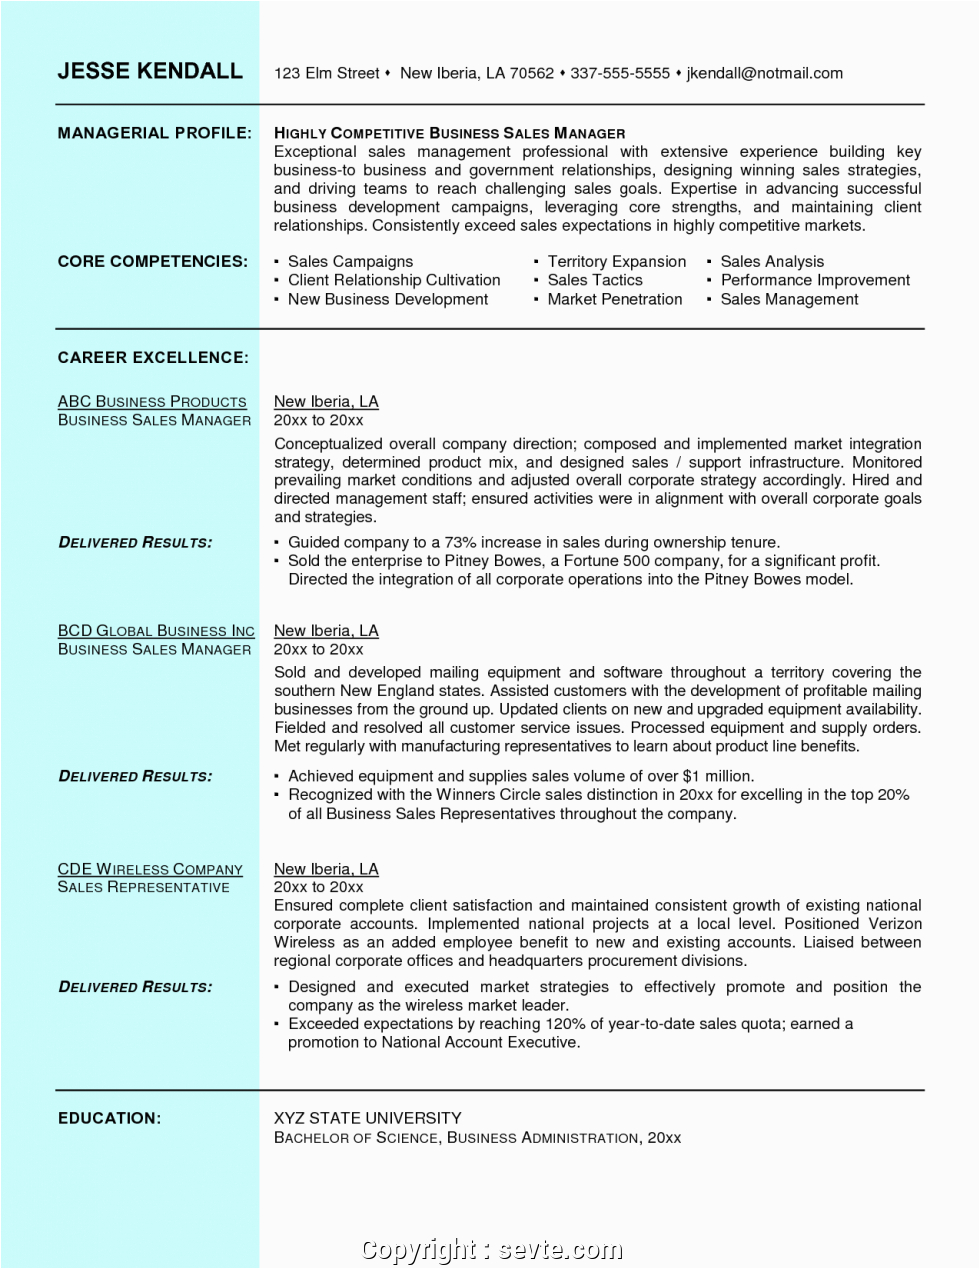 Free Resume Samples for Sales and Marketing Free Resume format for Sales and Marketing Manager Sample